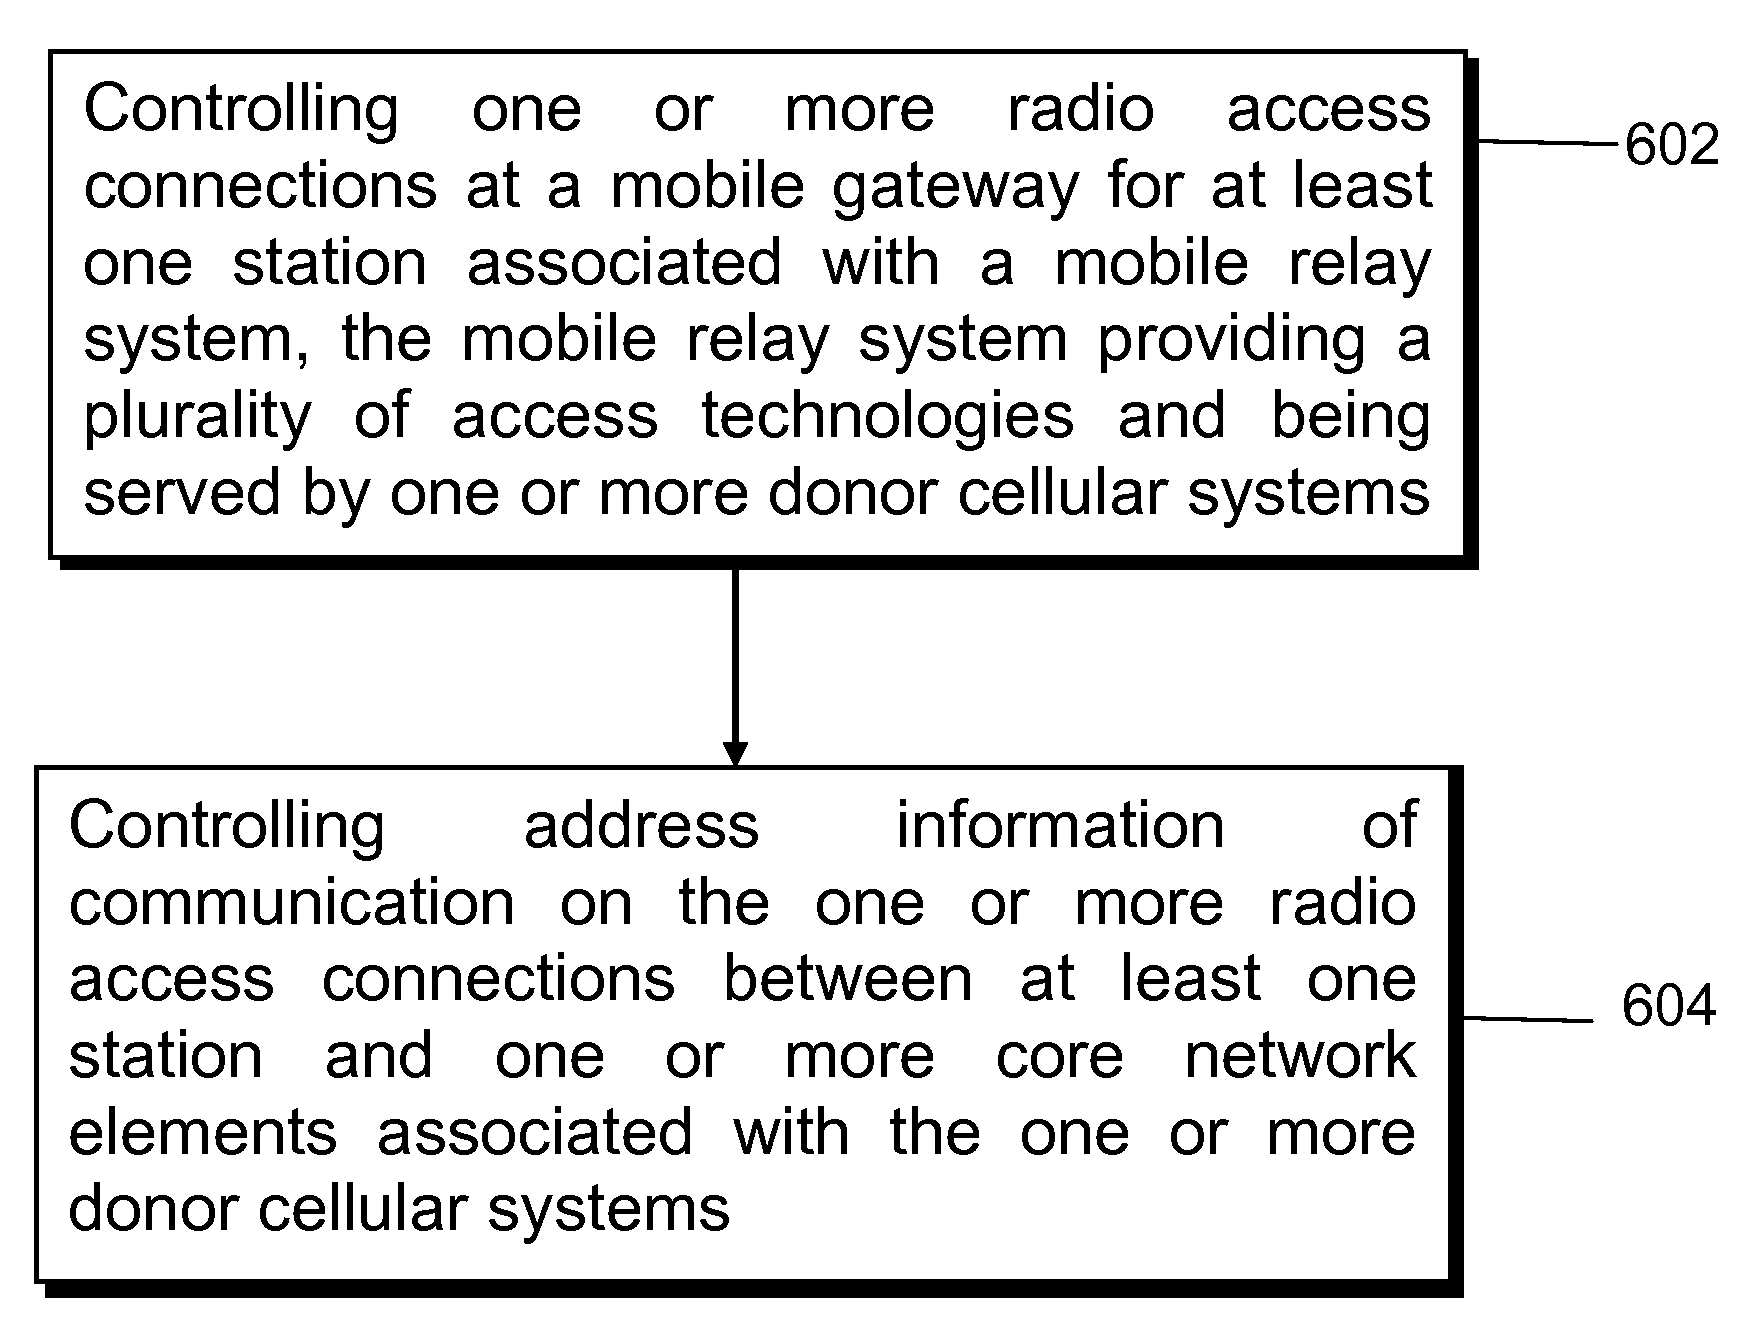 Gateway functionality for mobile relay system